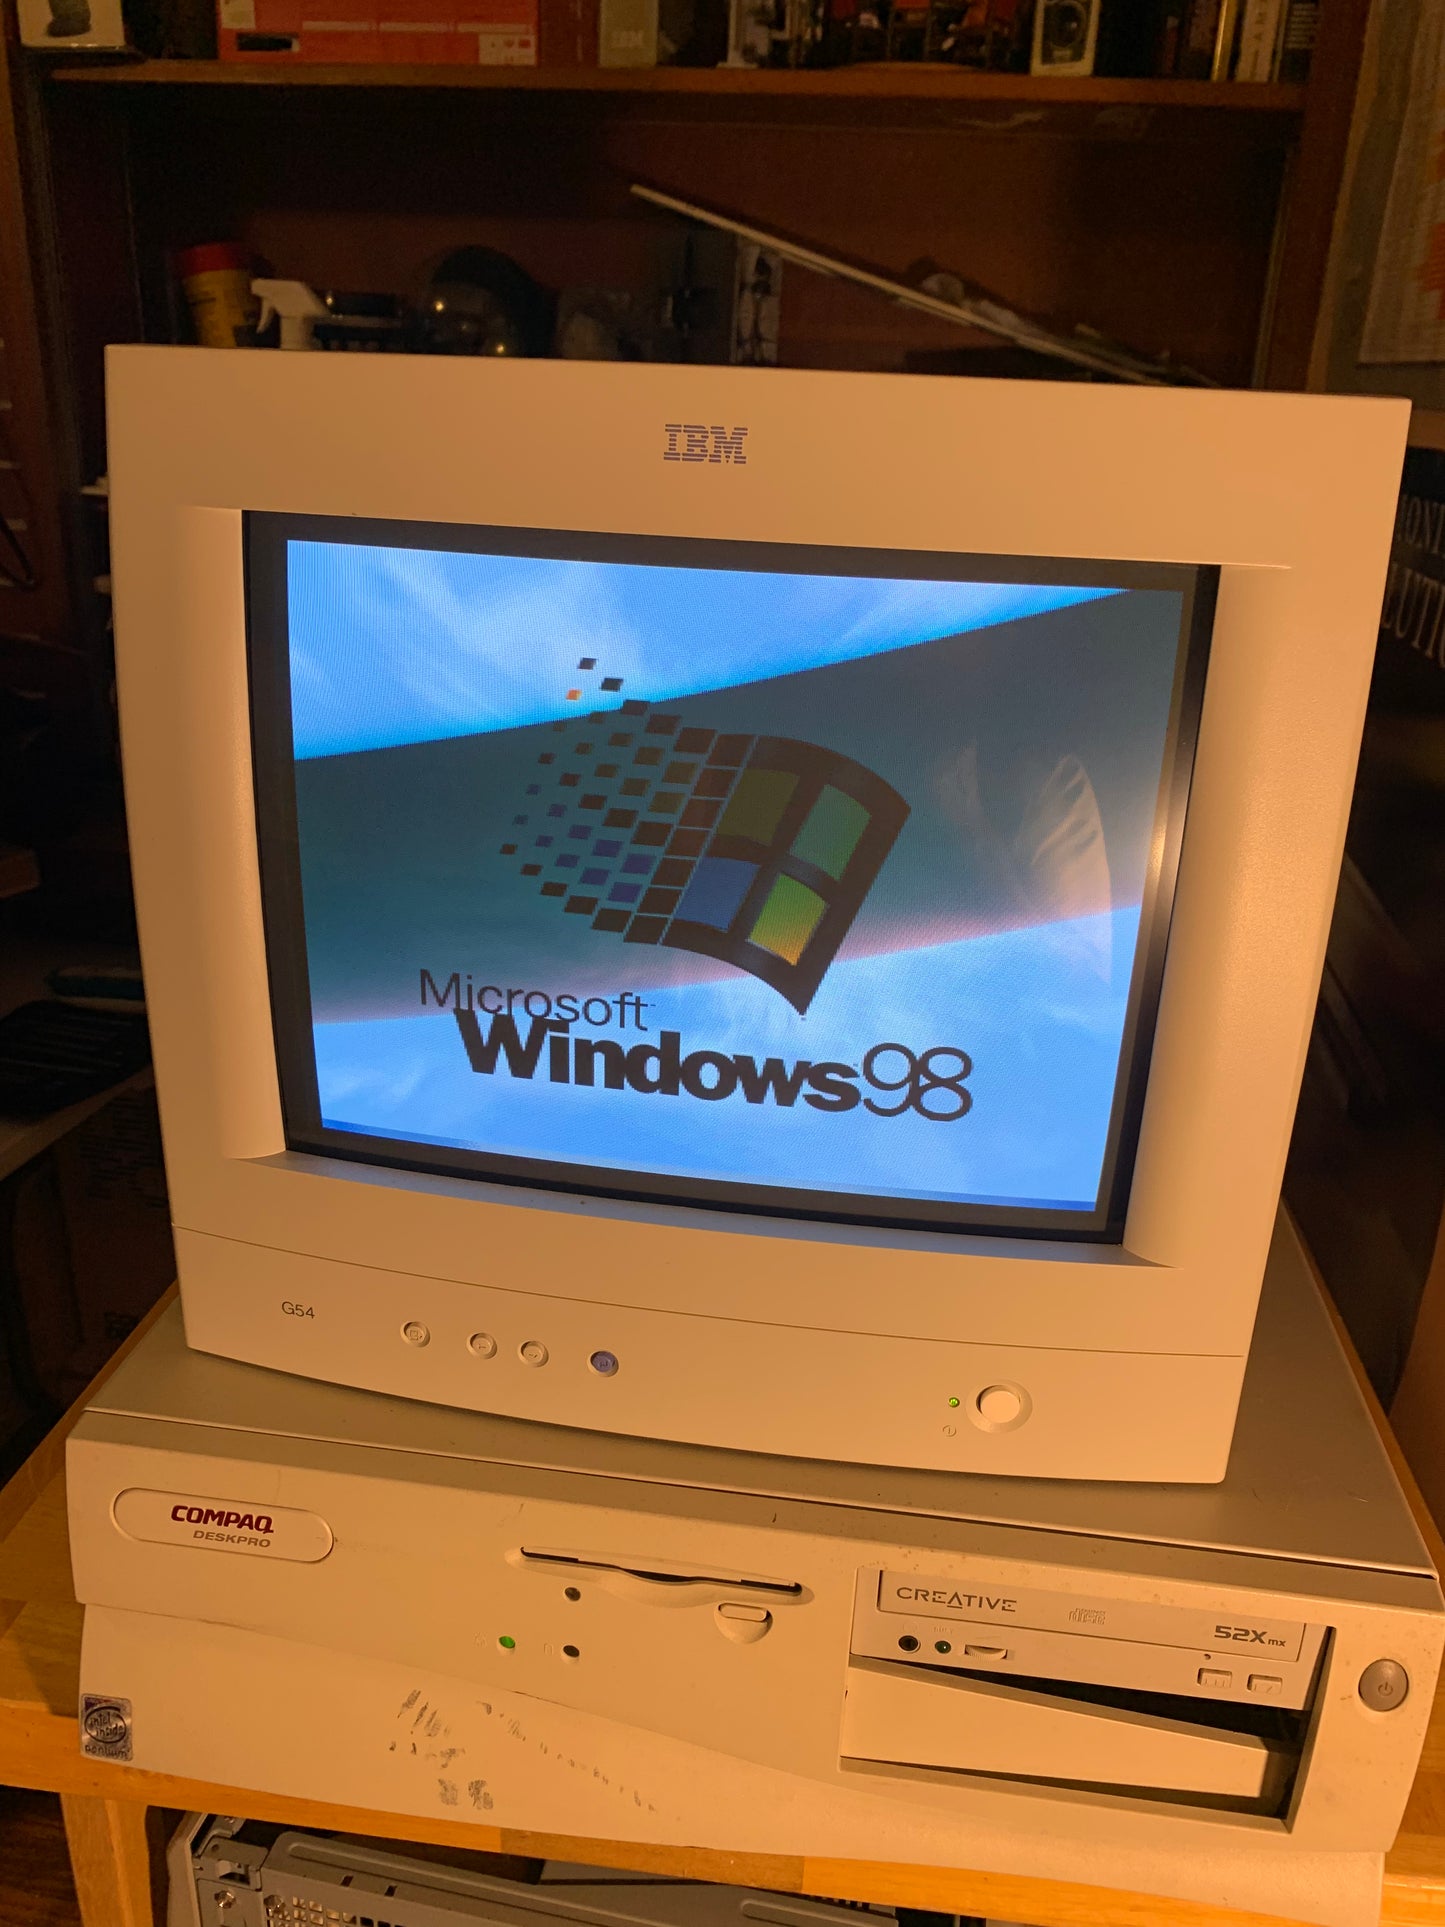 IBM G54 New Old Stock crt color monitor